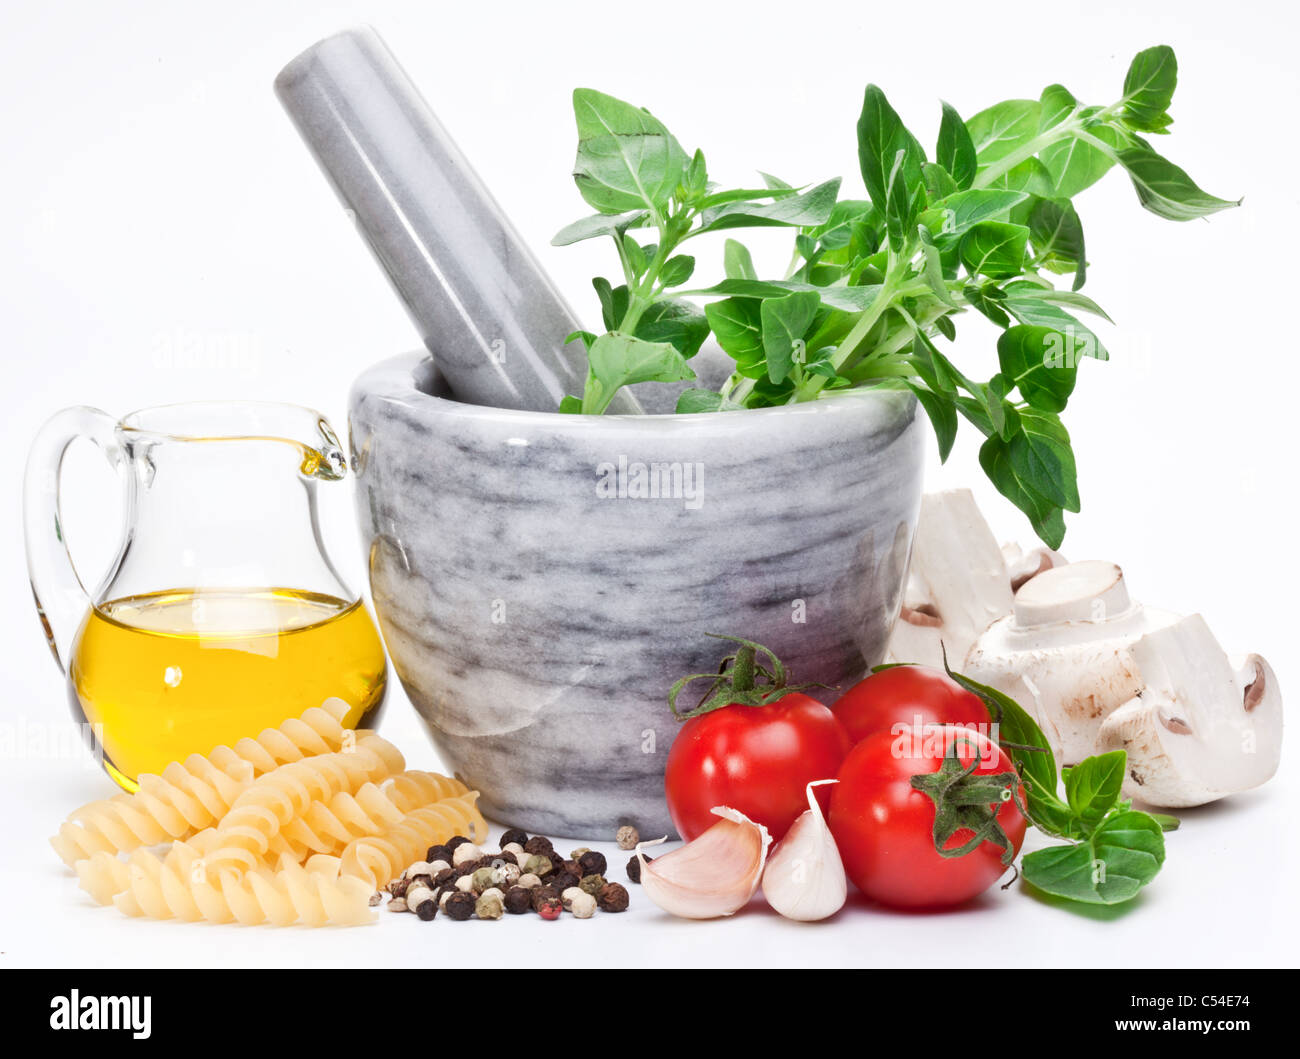 Mortar with pestle and basil herbs and olive oil. Stock Photo